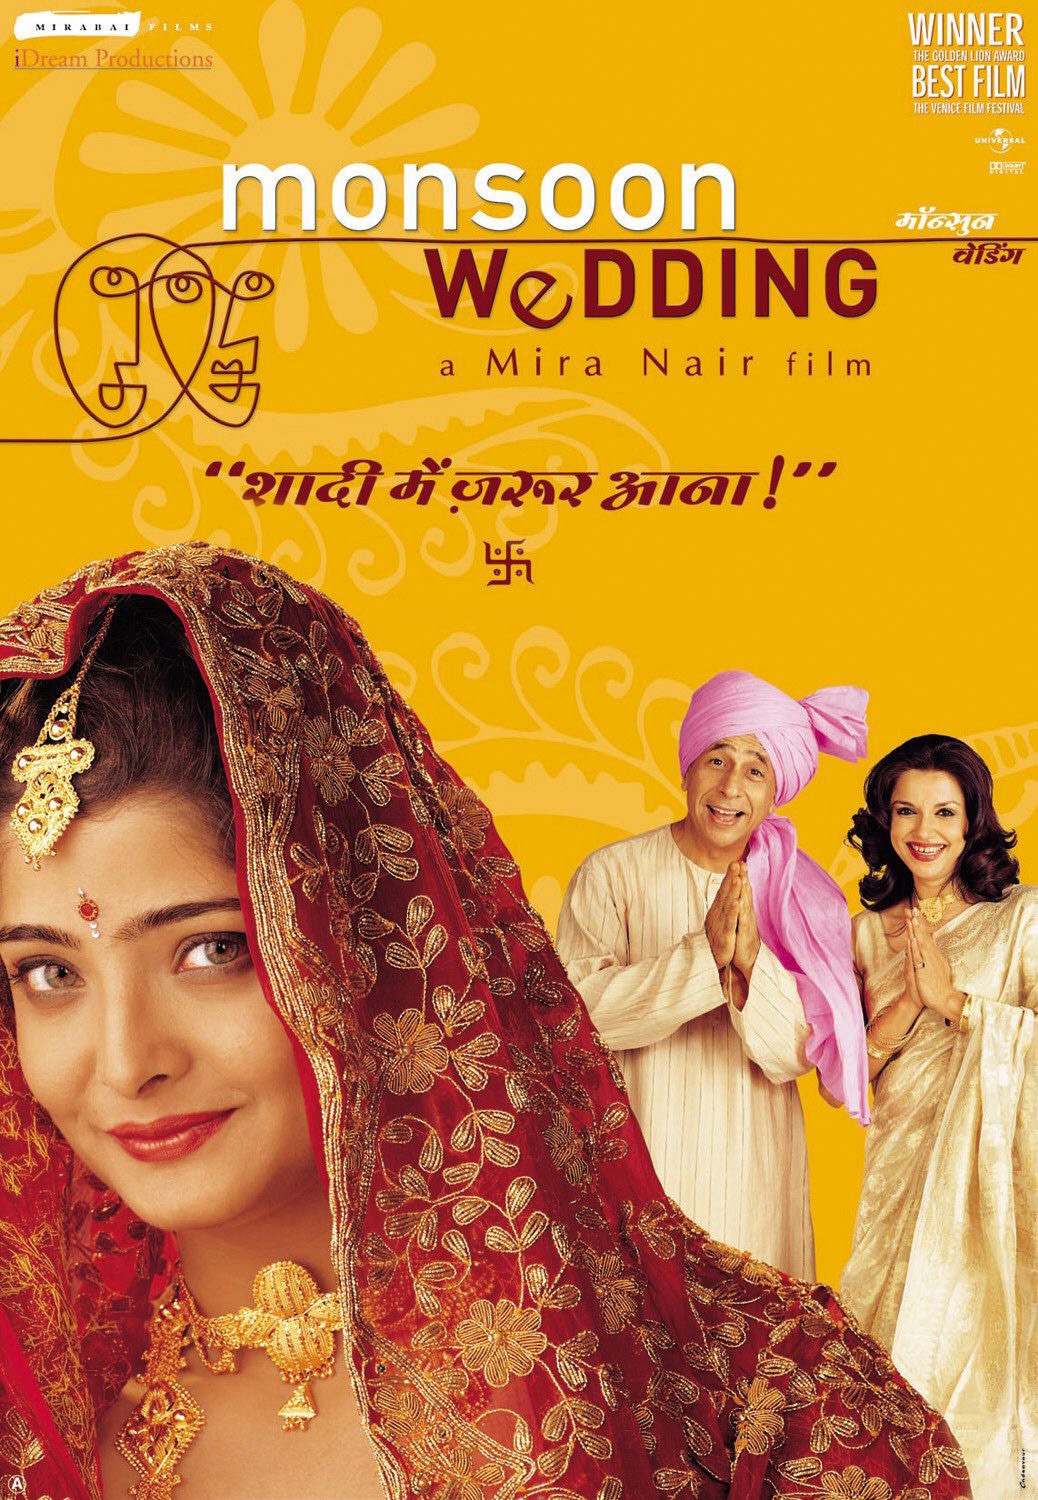 Extra Large Movie Poster Image for Monsoon Wedding (#6 of 8)